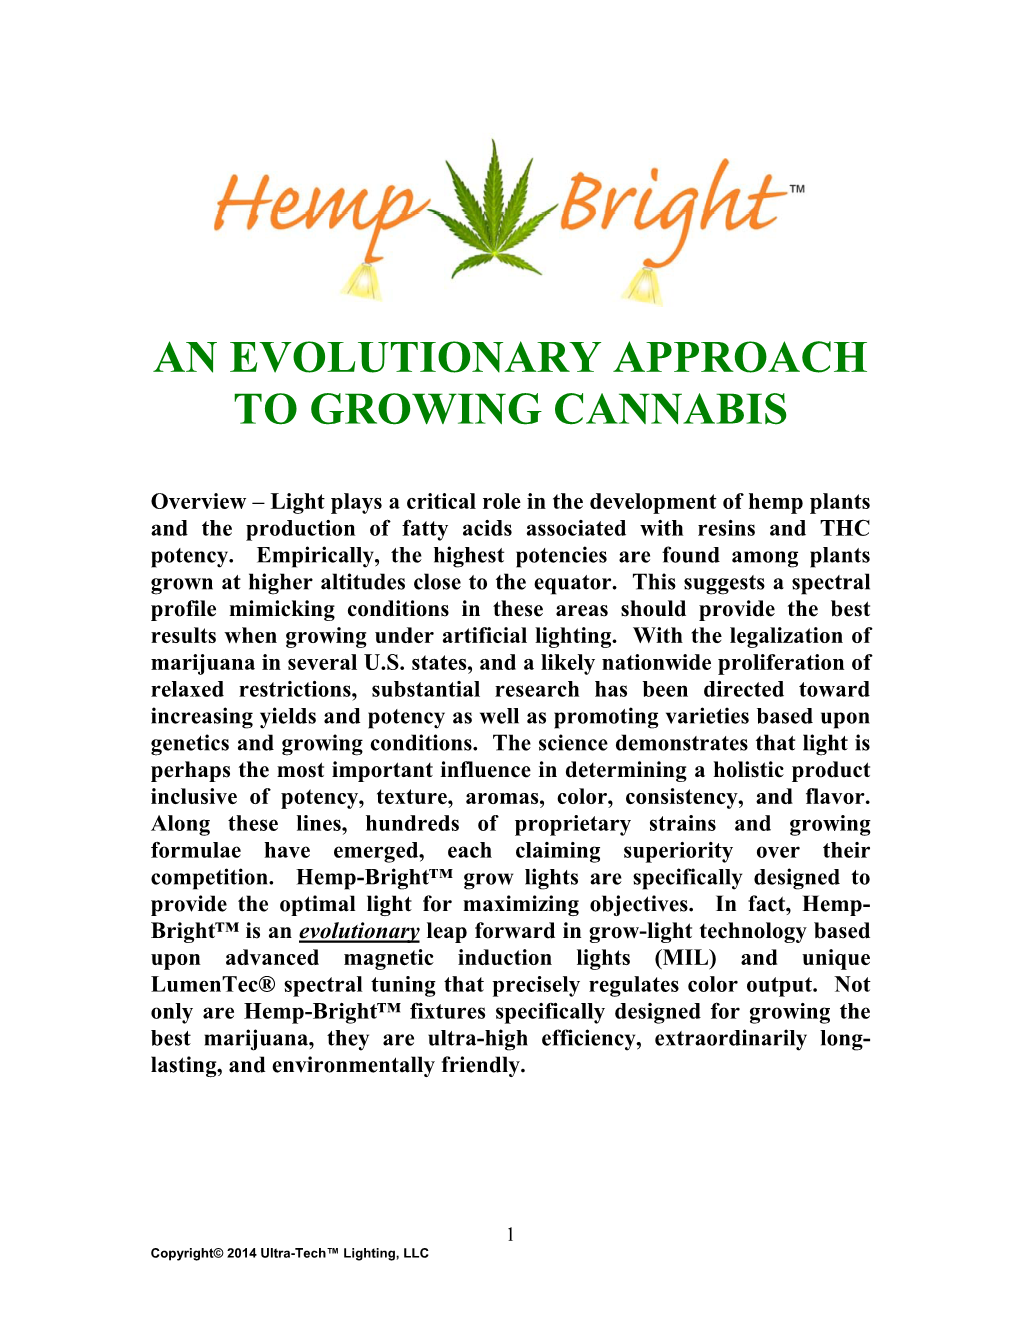 An Evolutionary Approach to Growing Cannabis